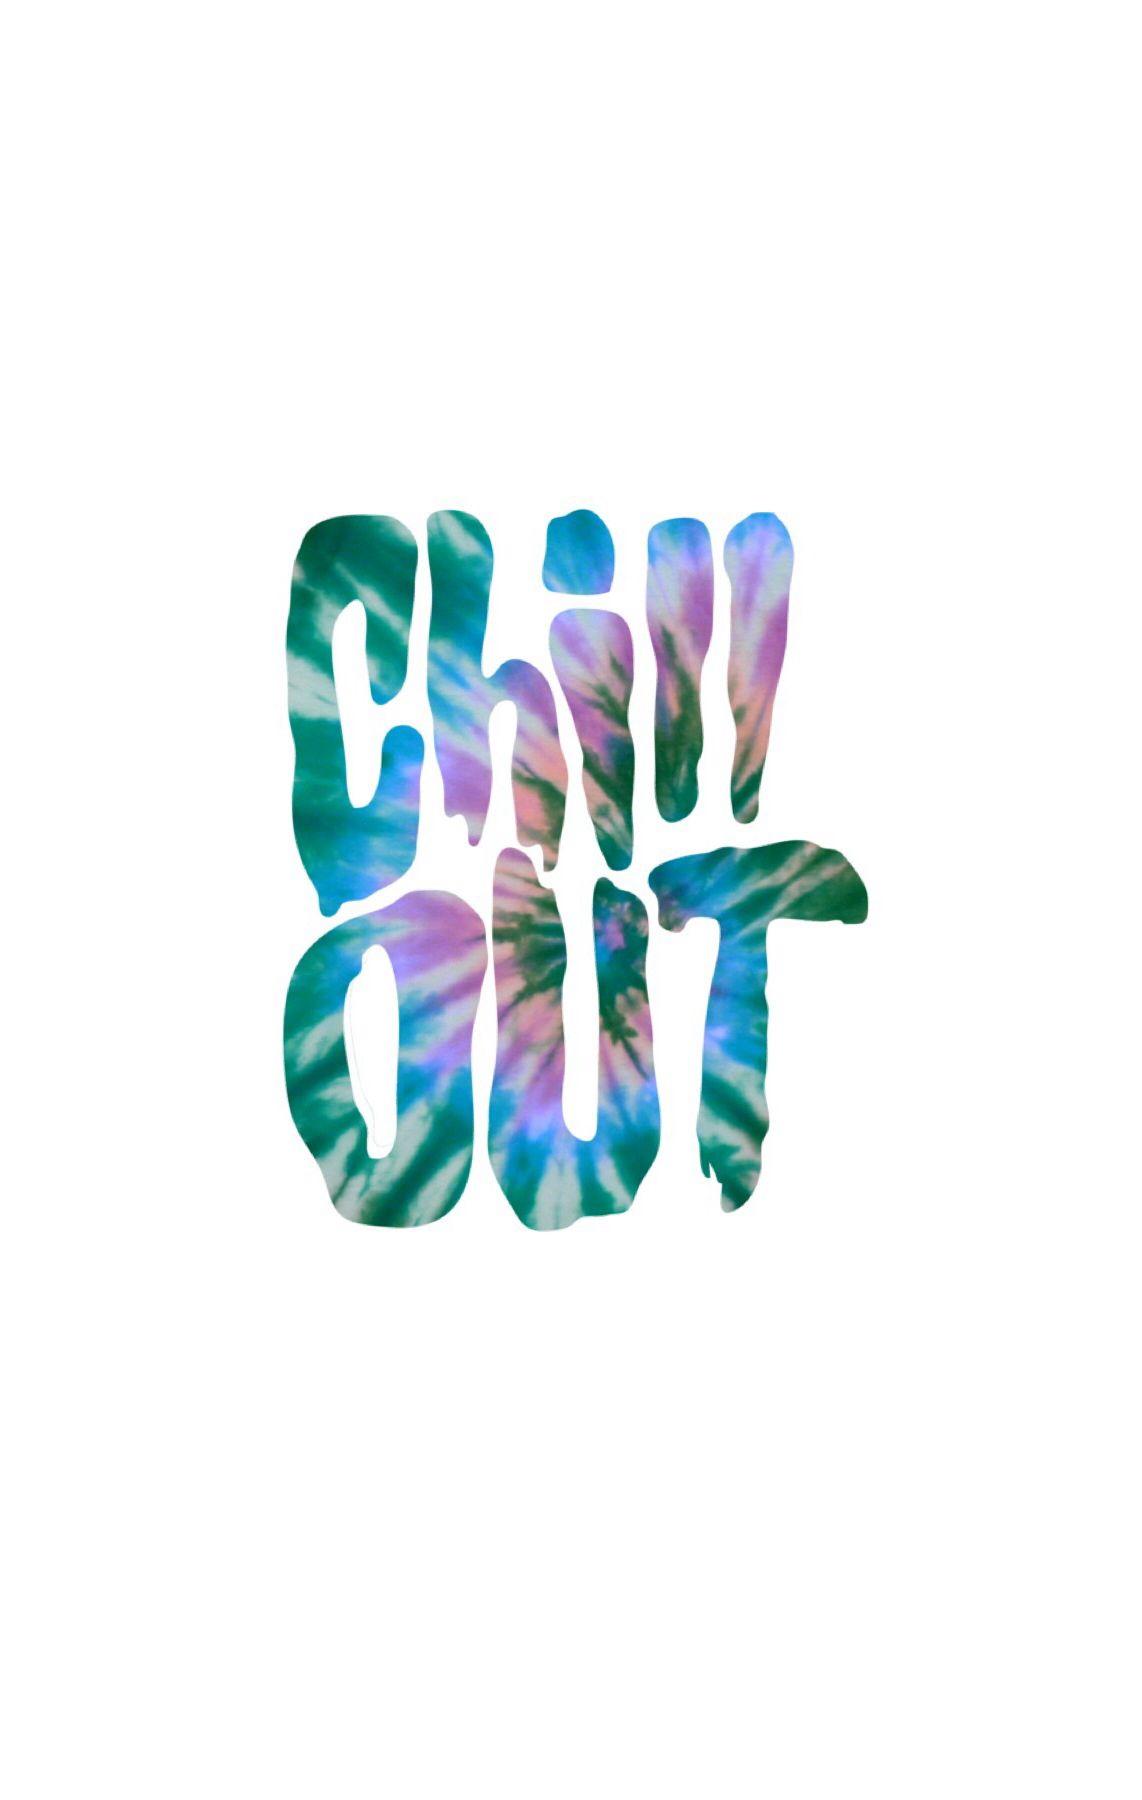 Chill out. Background/ wallpaper. Stickers